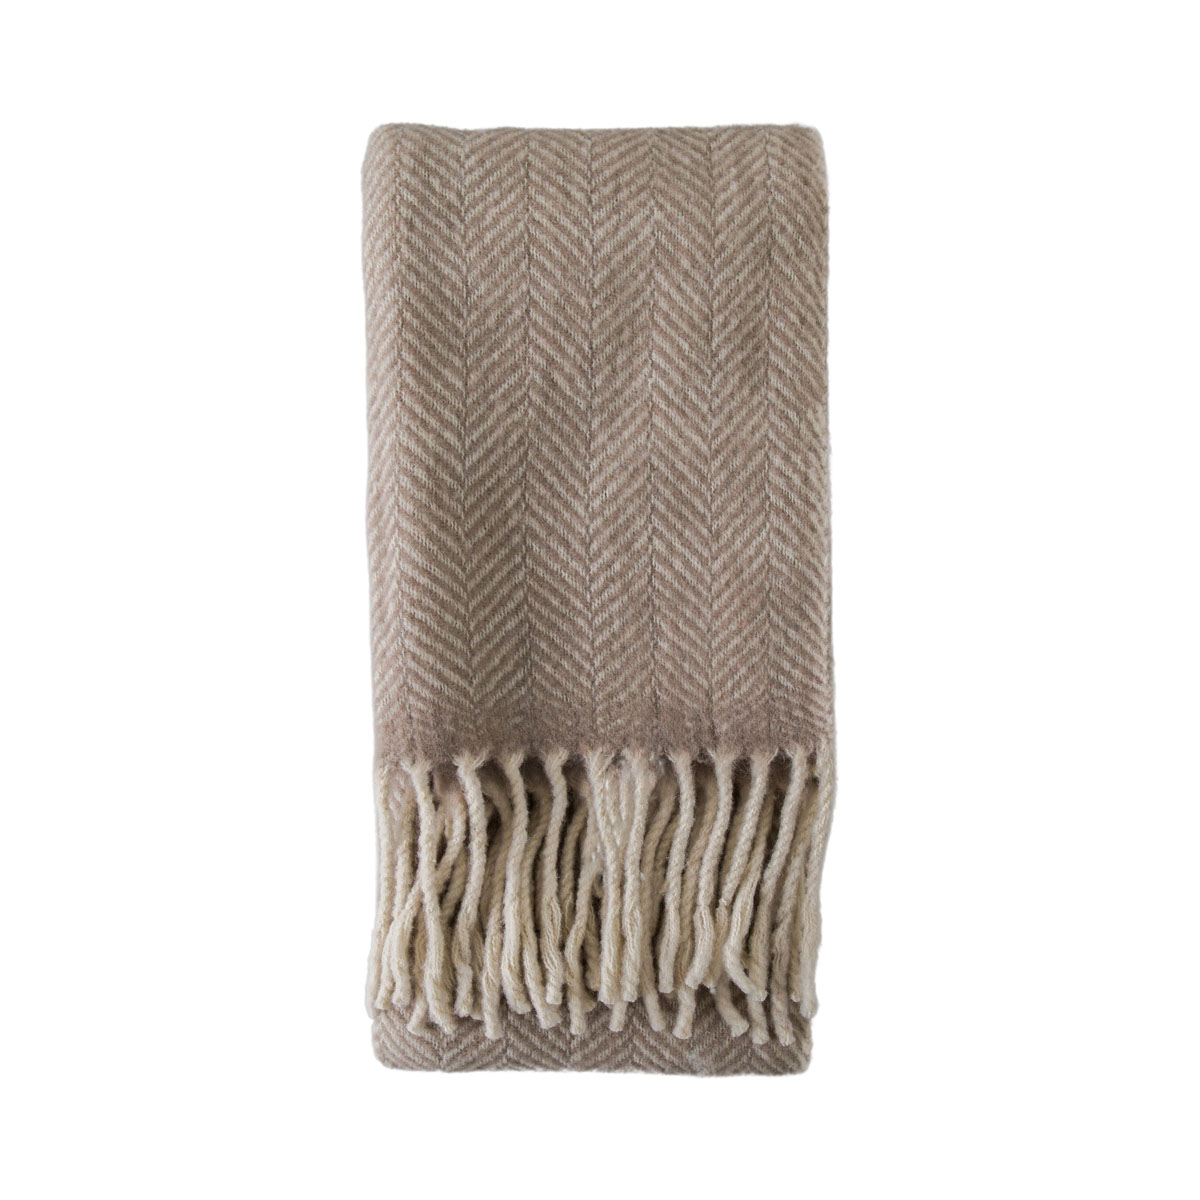 Wool Throw Taupe 1300x1700mm